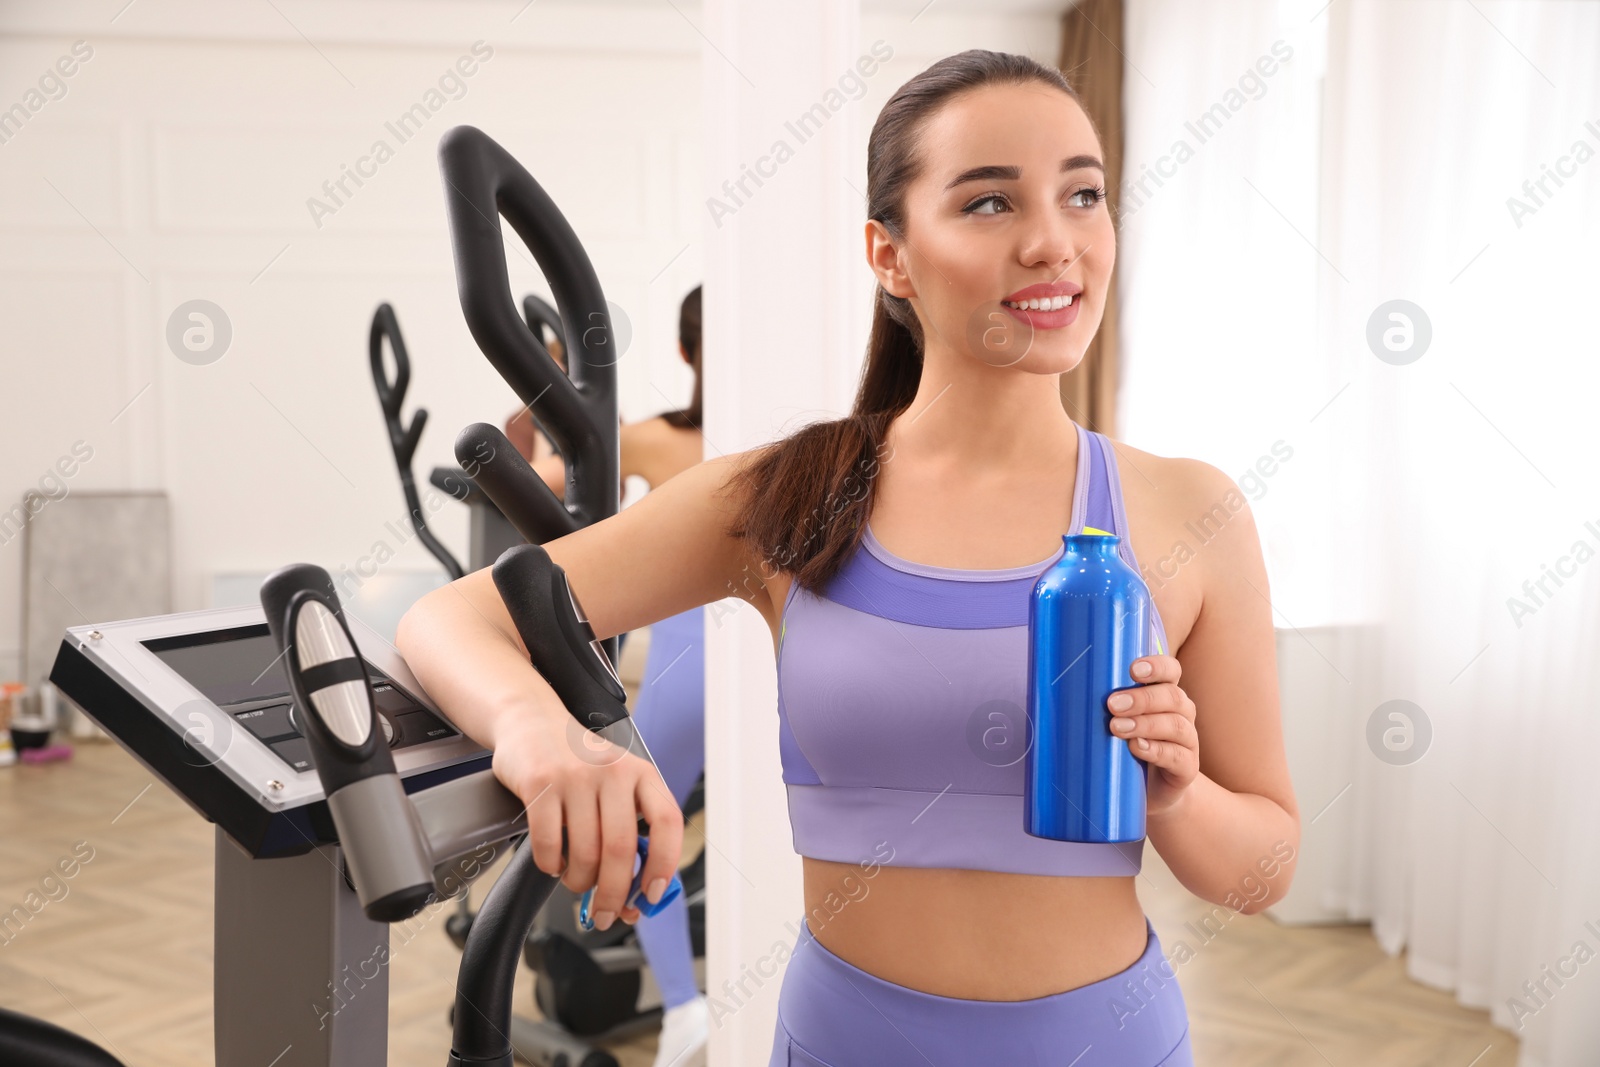 Photo of Woman with bottle near elliptical machine indoors